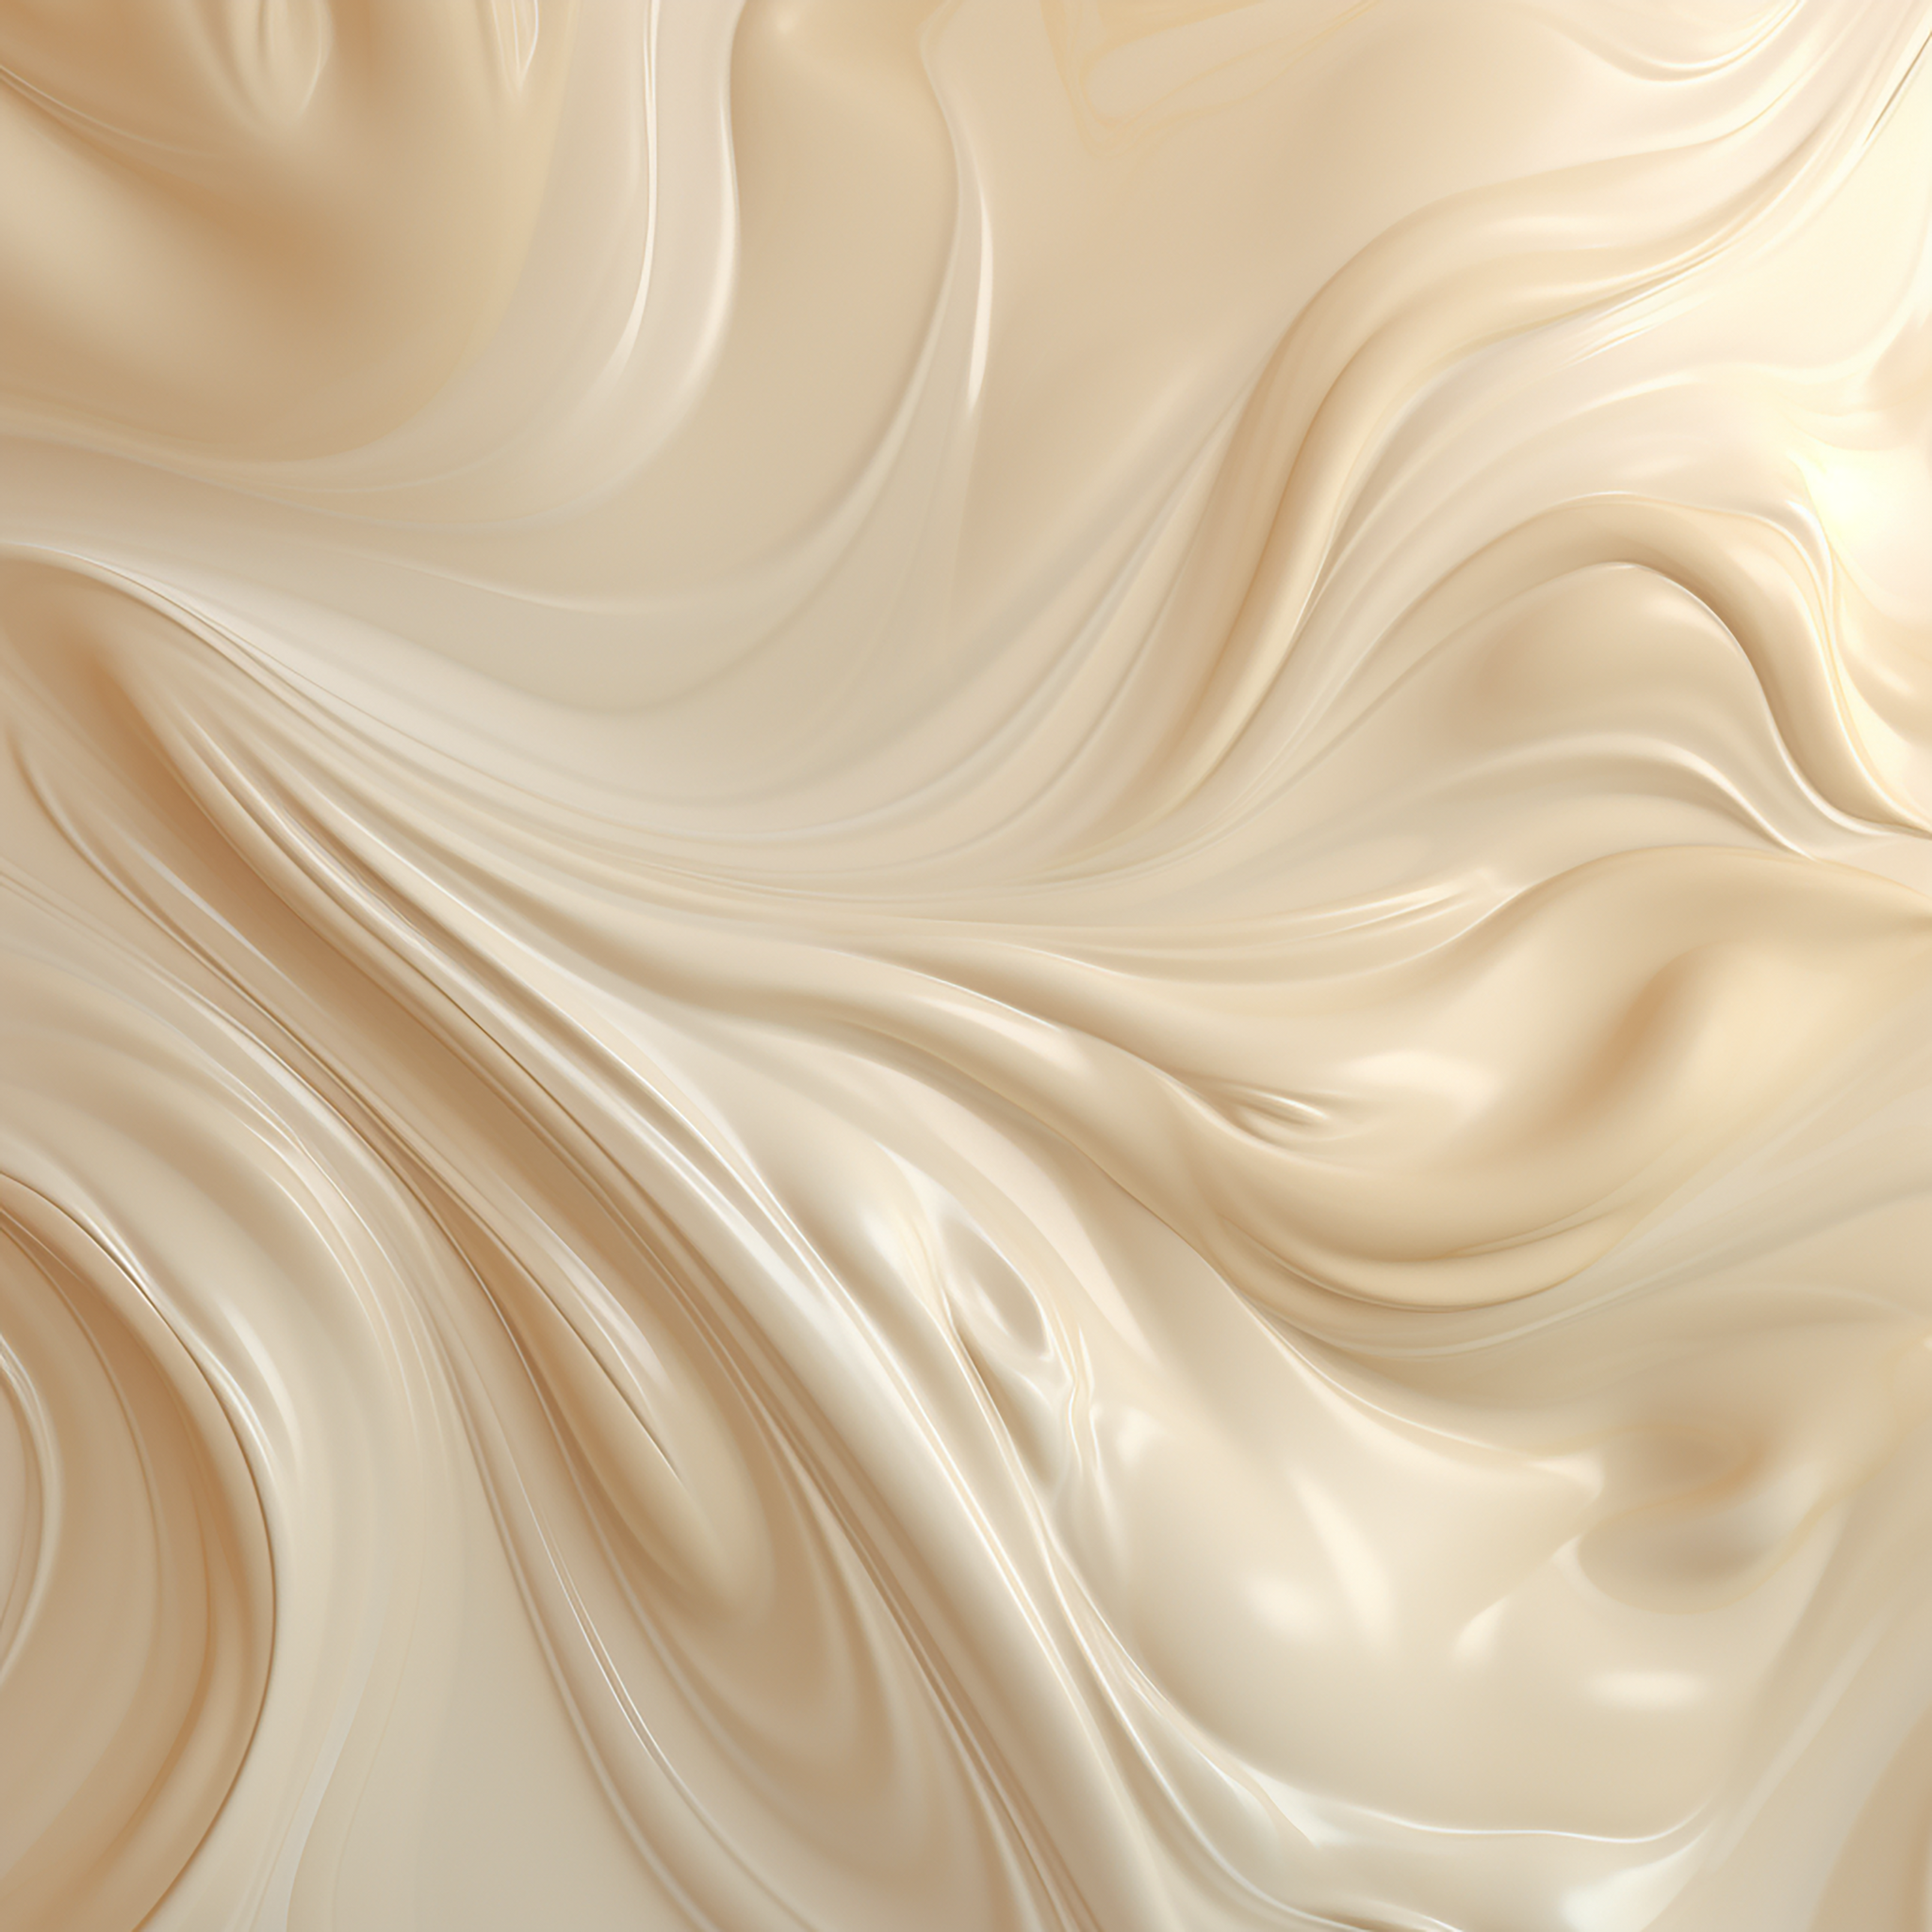 Mayonnaise. Beige abstract background with swirls of paint